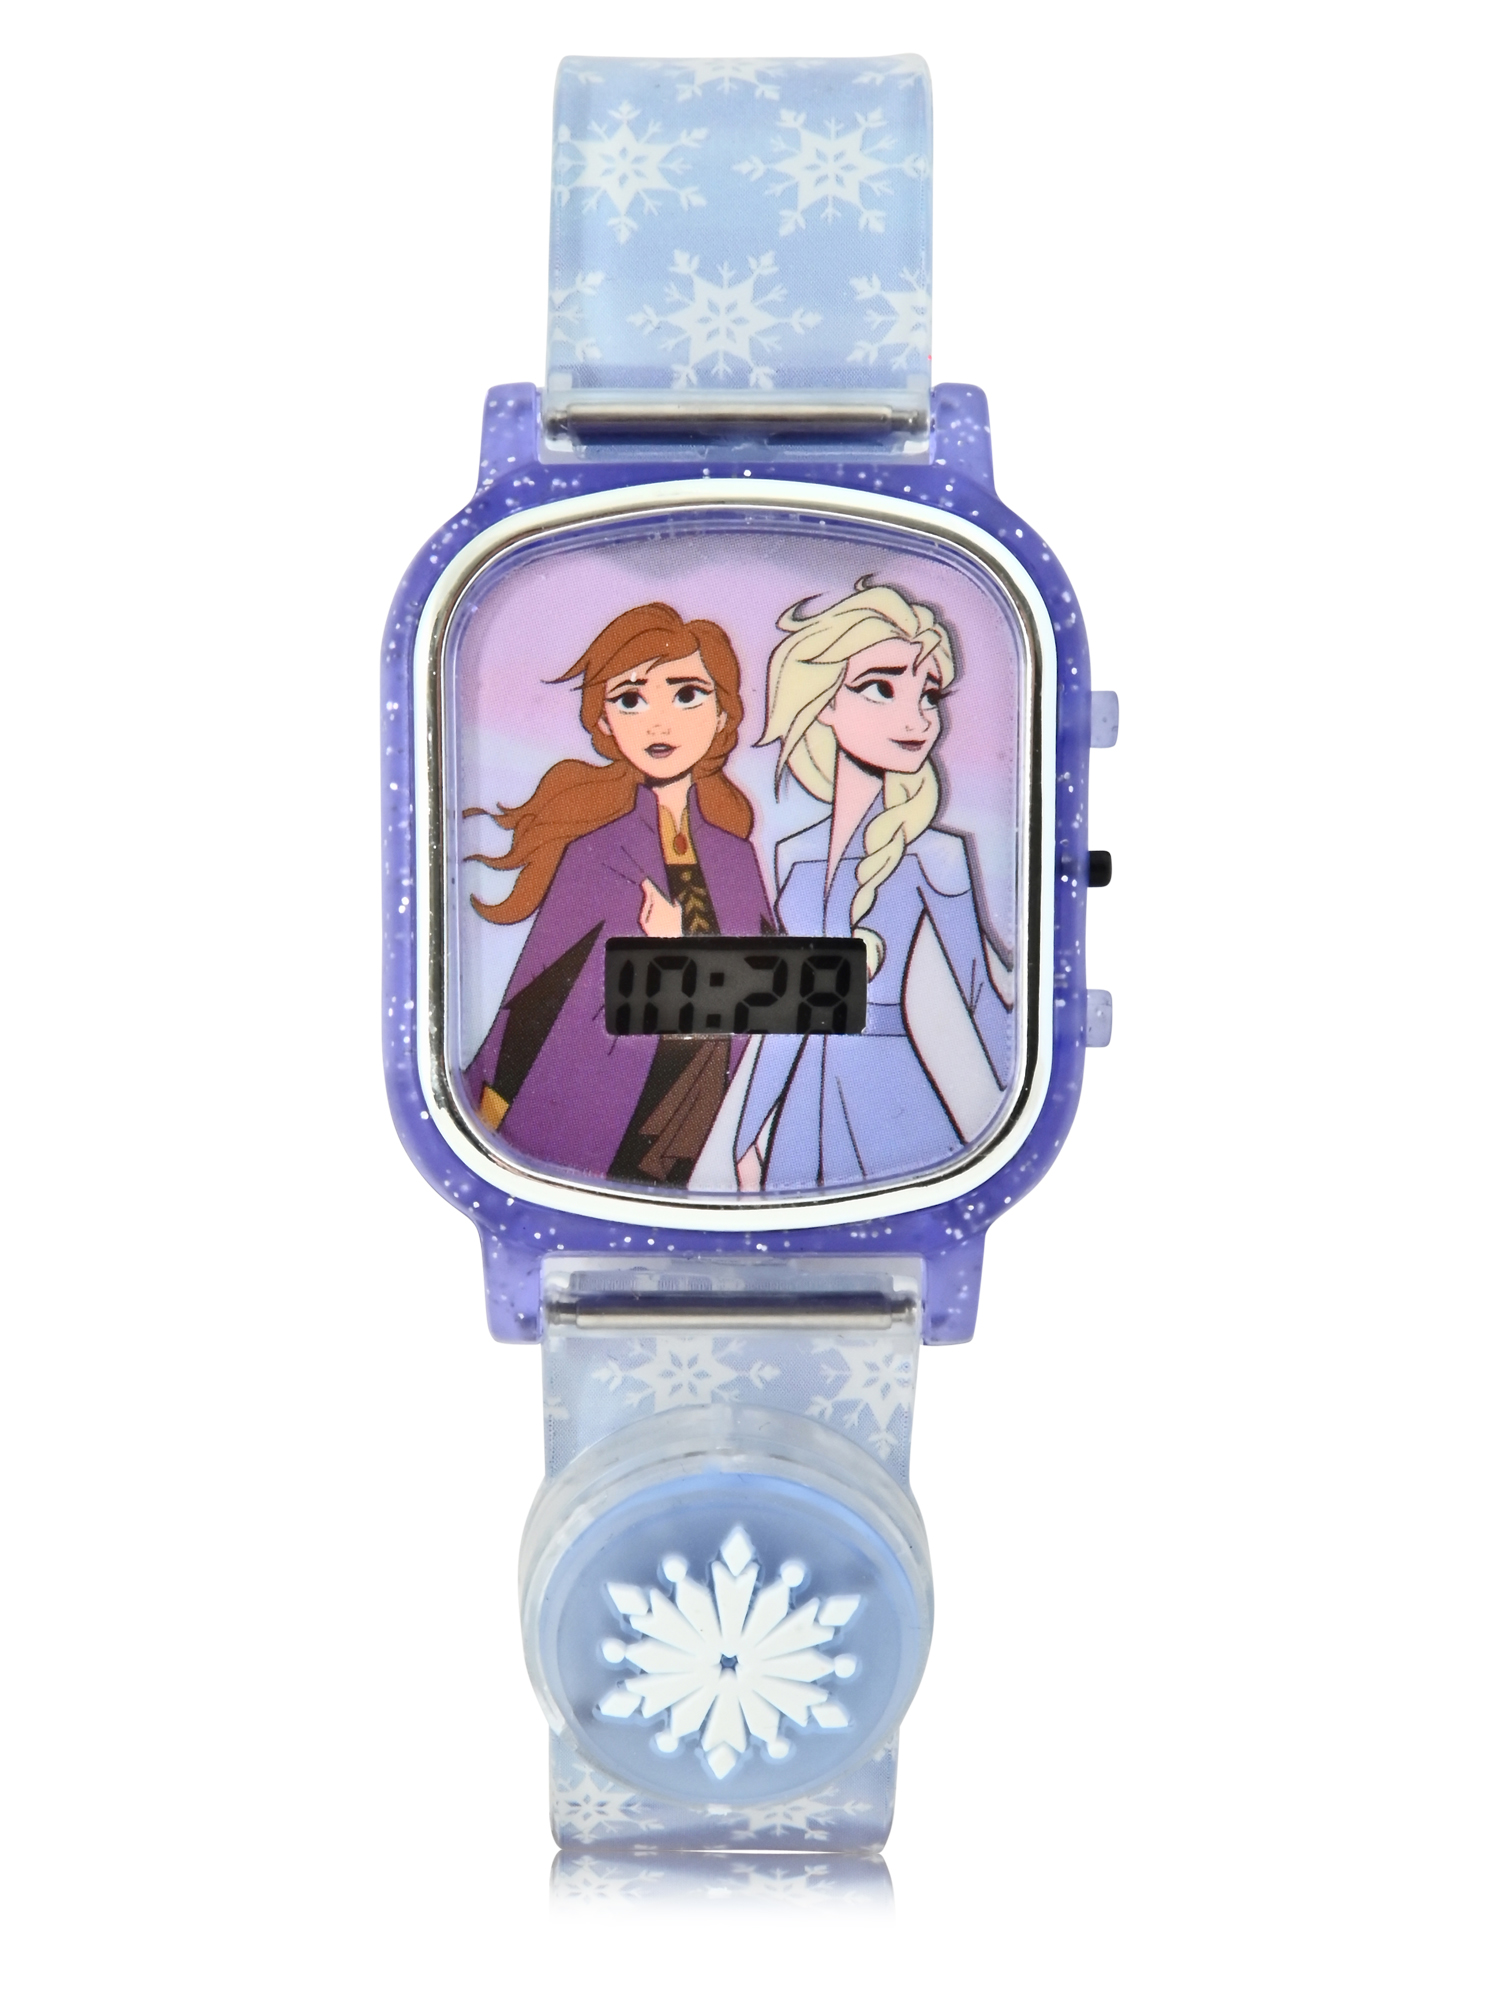 Disney Frozen Female Child LCD Watch with Flashing Lights on a Silicone Strap (FZN4954WM) - image 1 of 3